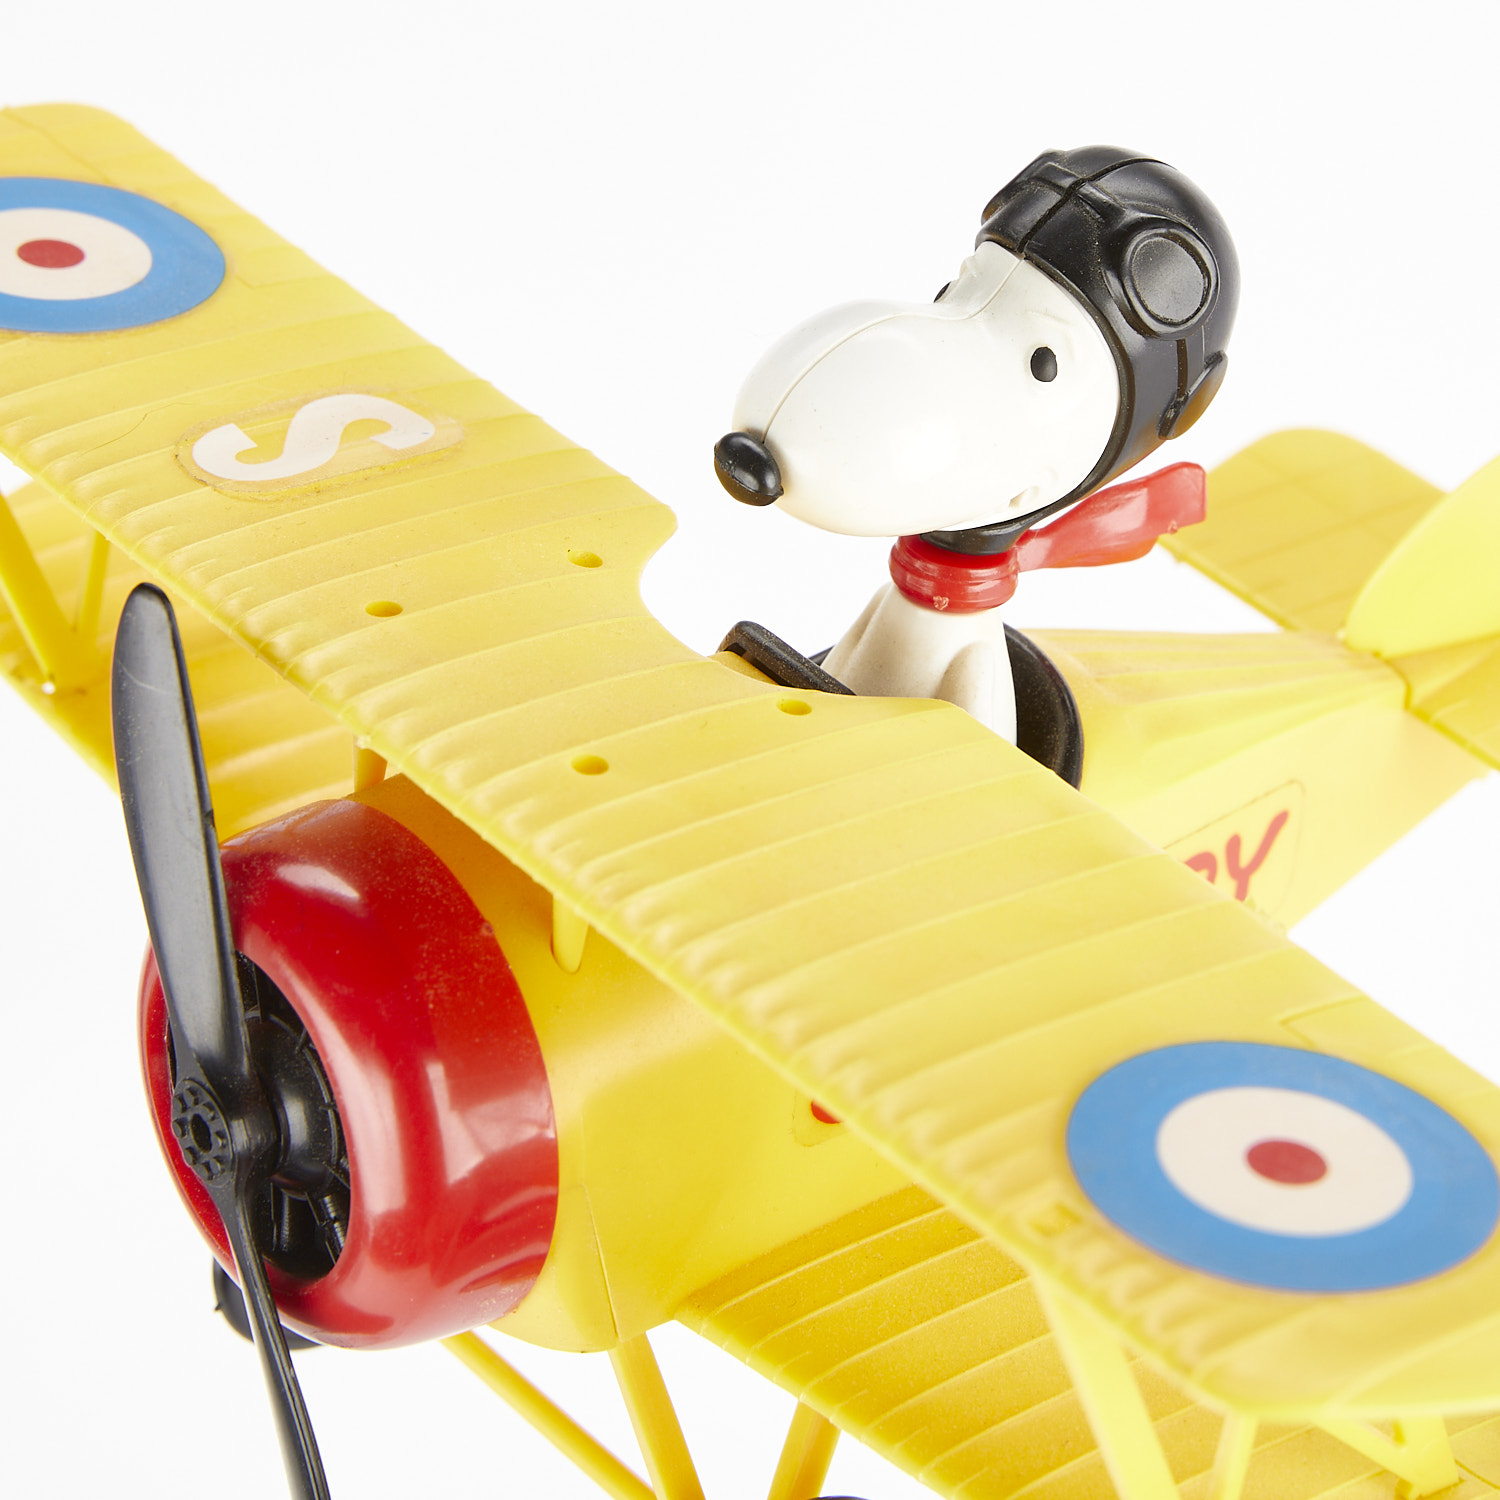 2 Toy Planes Red Baron & Flying Ace Snoopy - Image 9 of 10